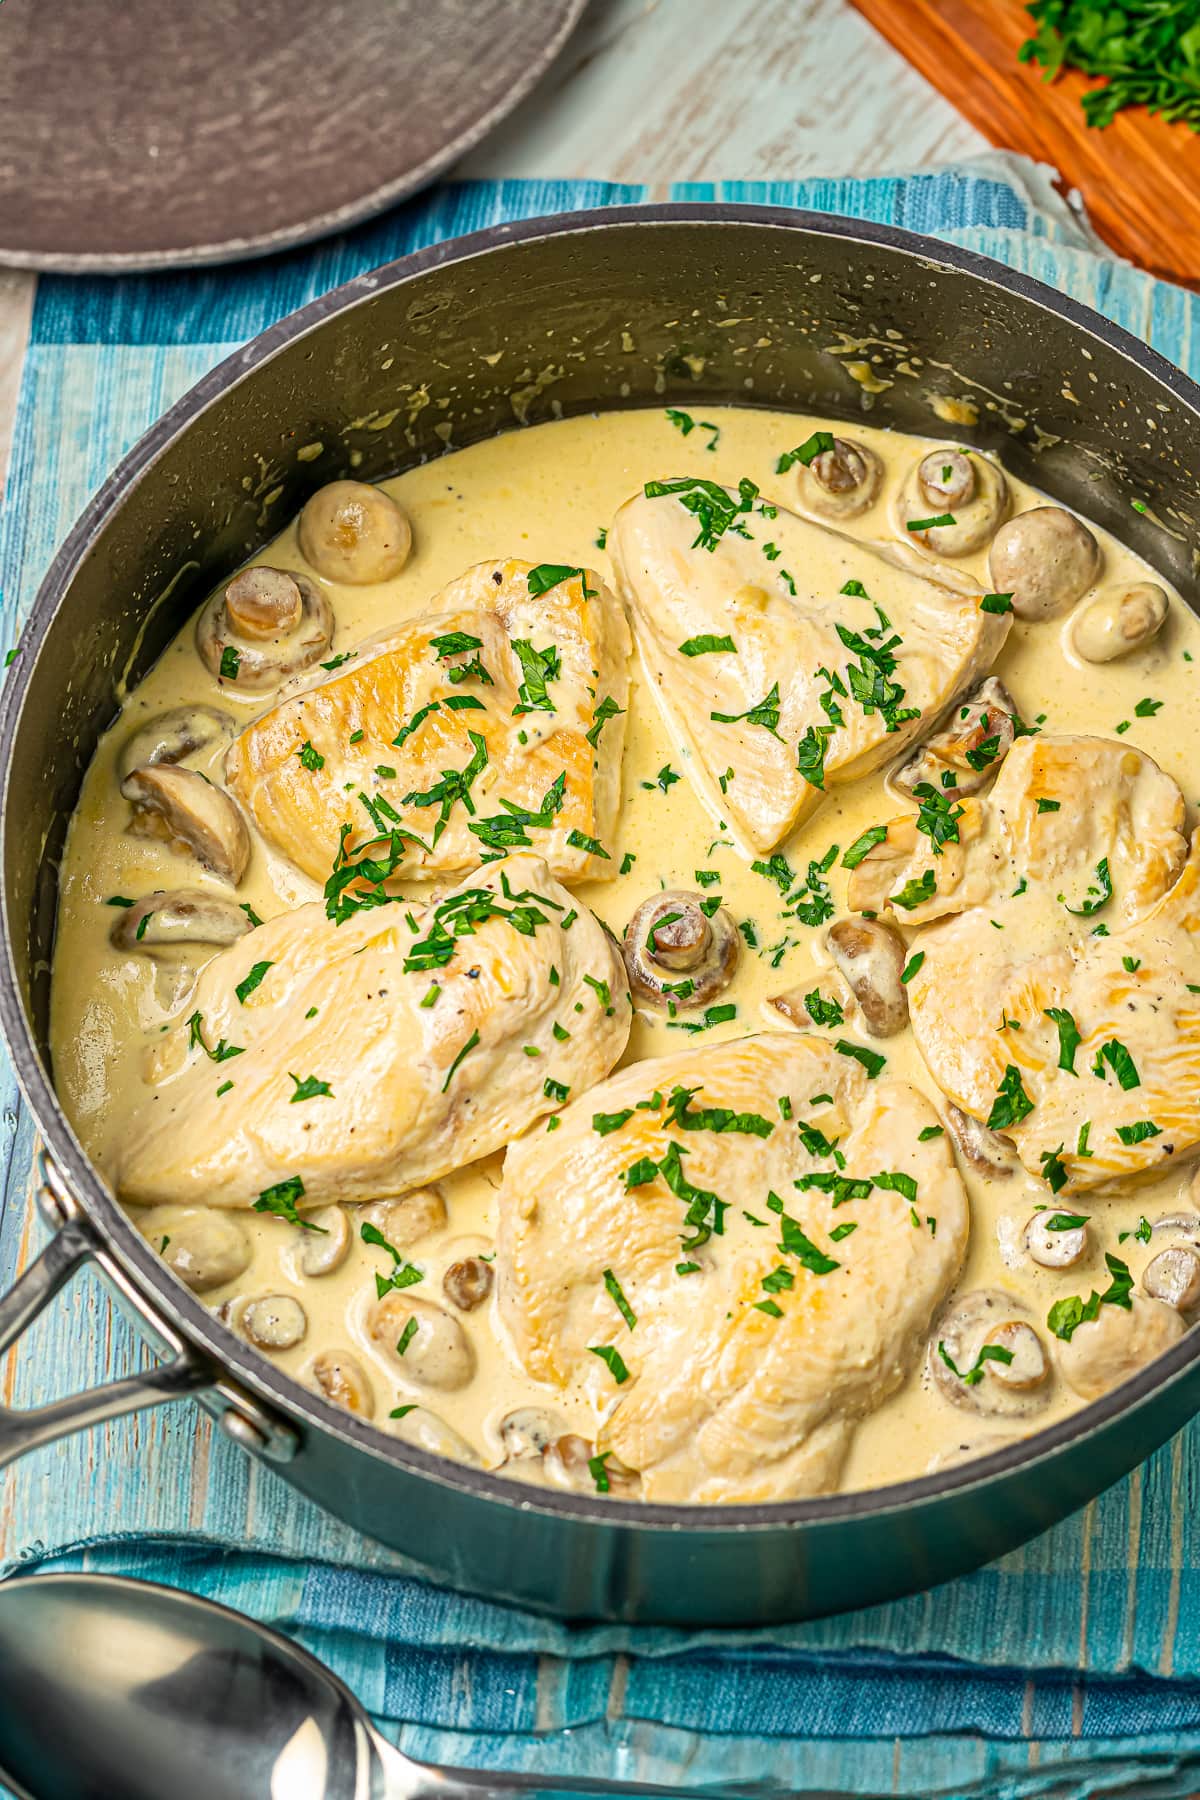 Creamy mushroom sauce simmering with seared chicken breasts in a skillet, garnished with chopped parsley.